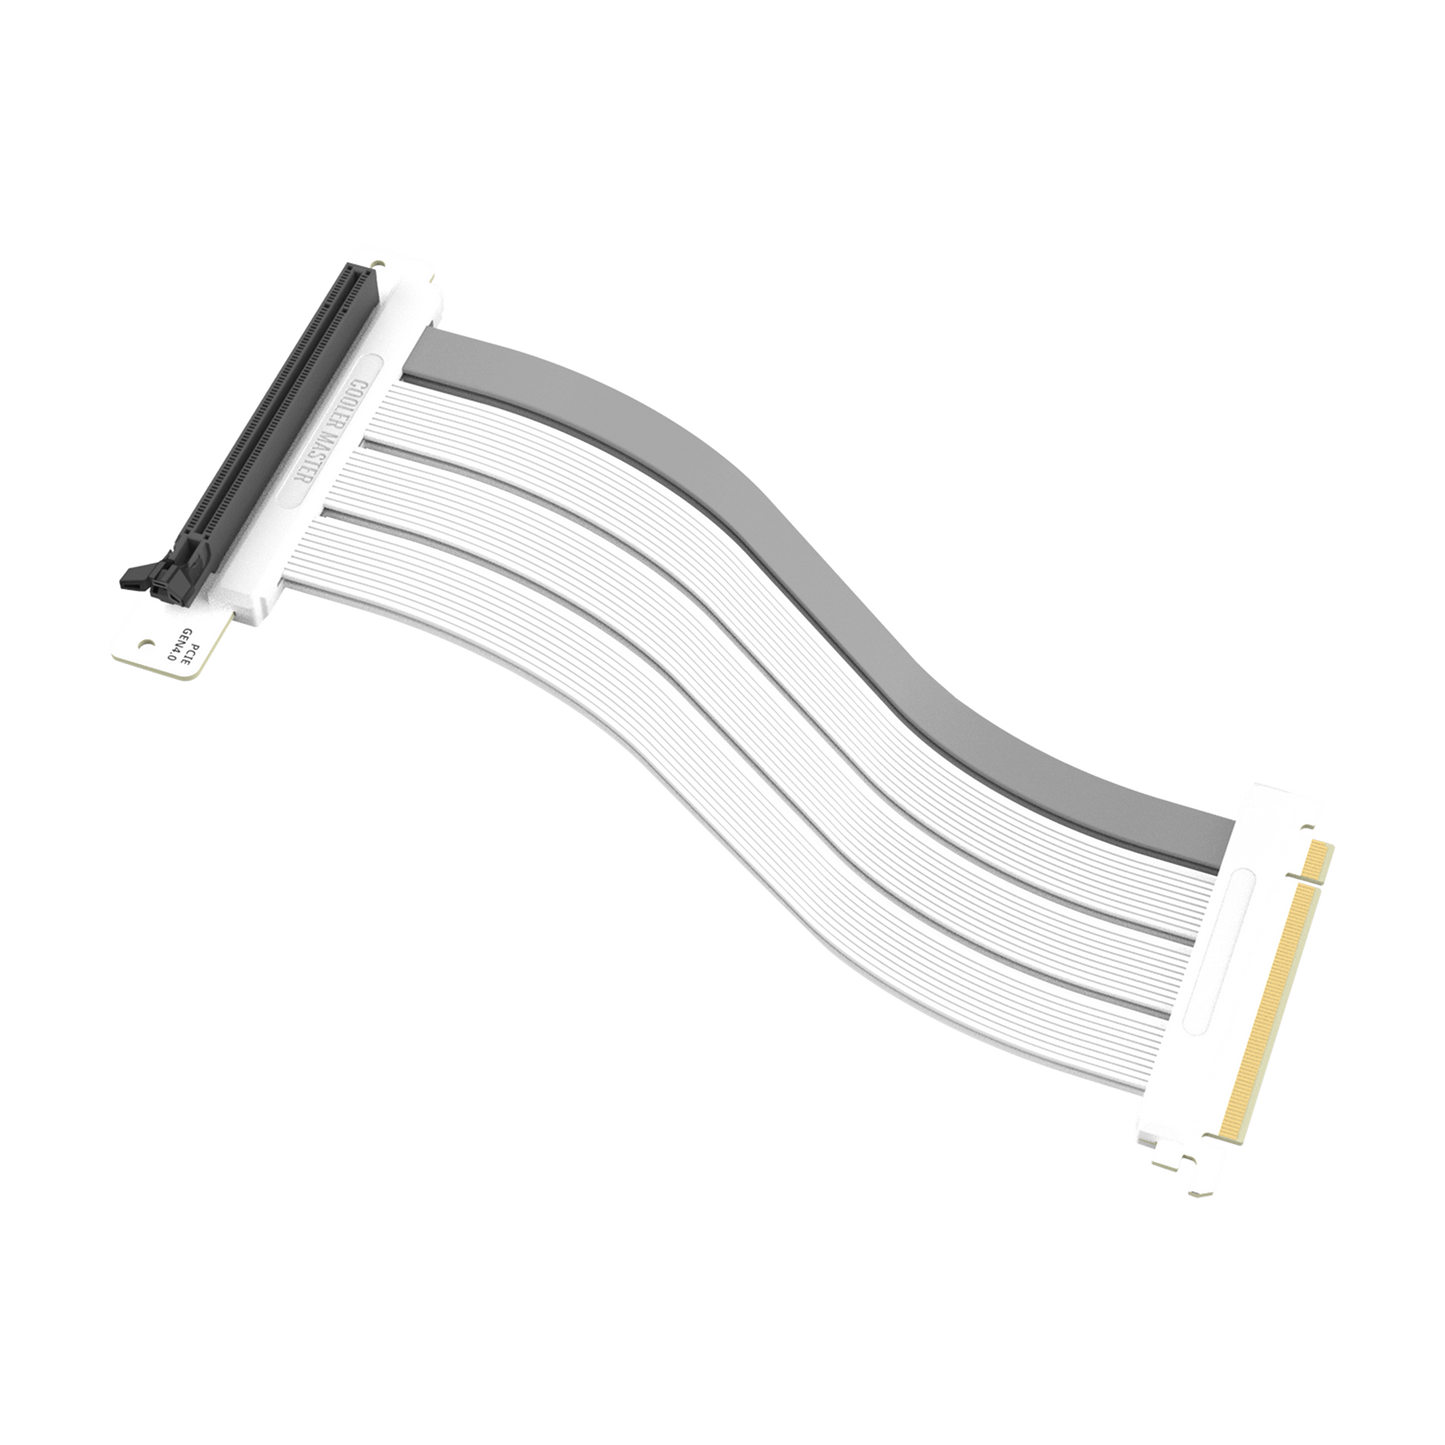 Cooler Master Riser Cable - PCIe 4.0 x16 - 300mm - White